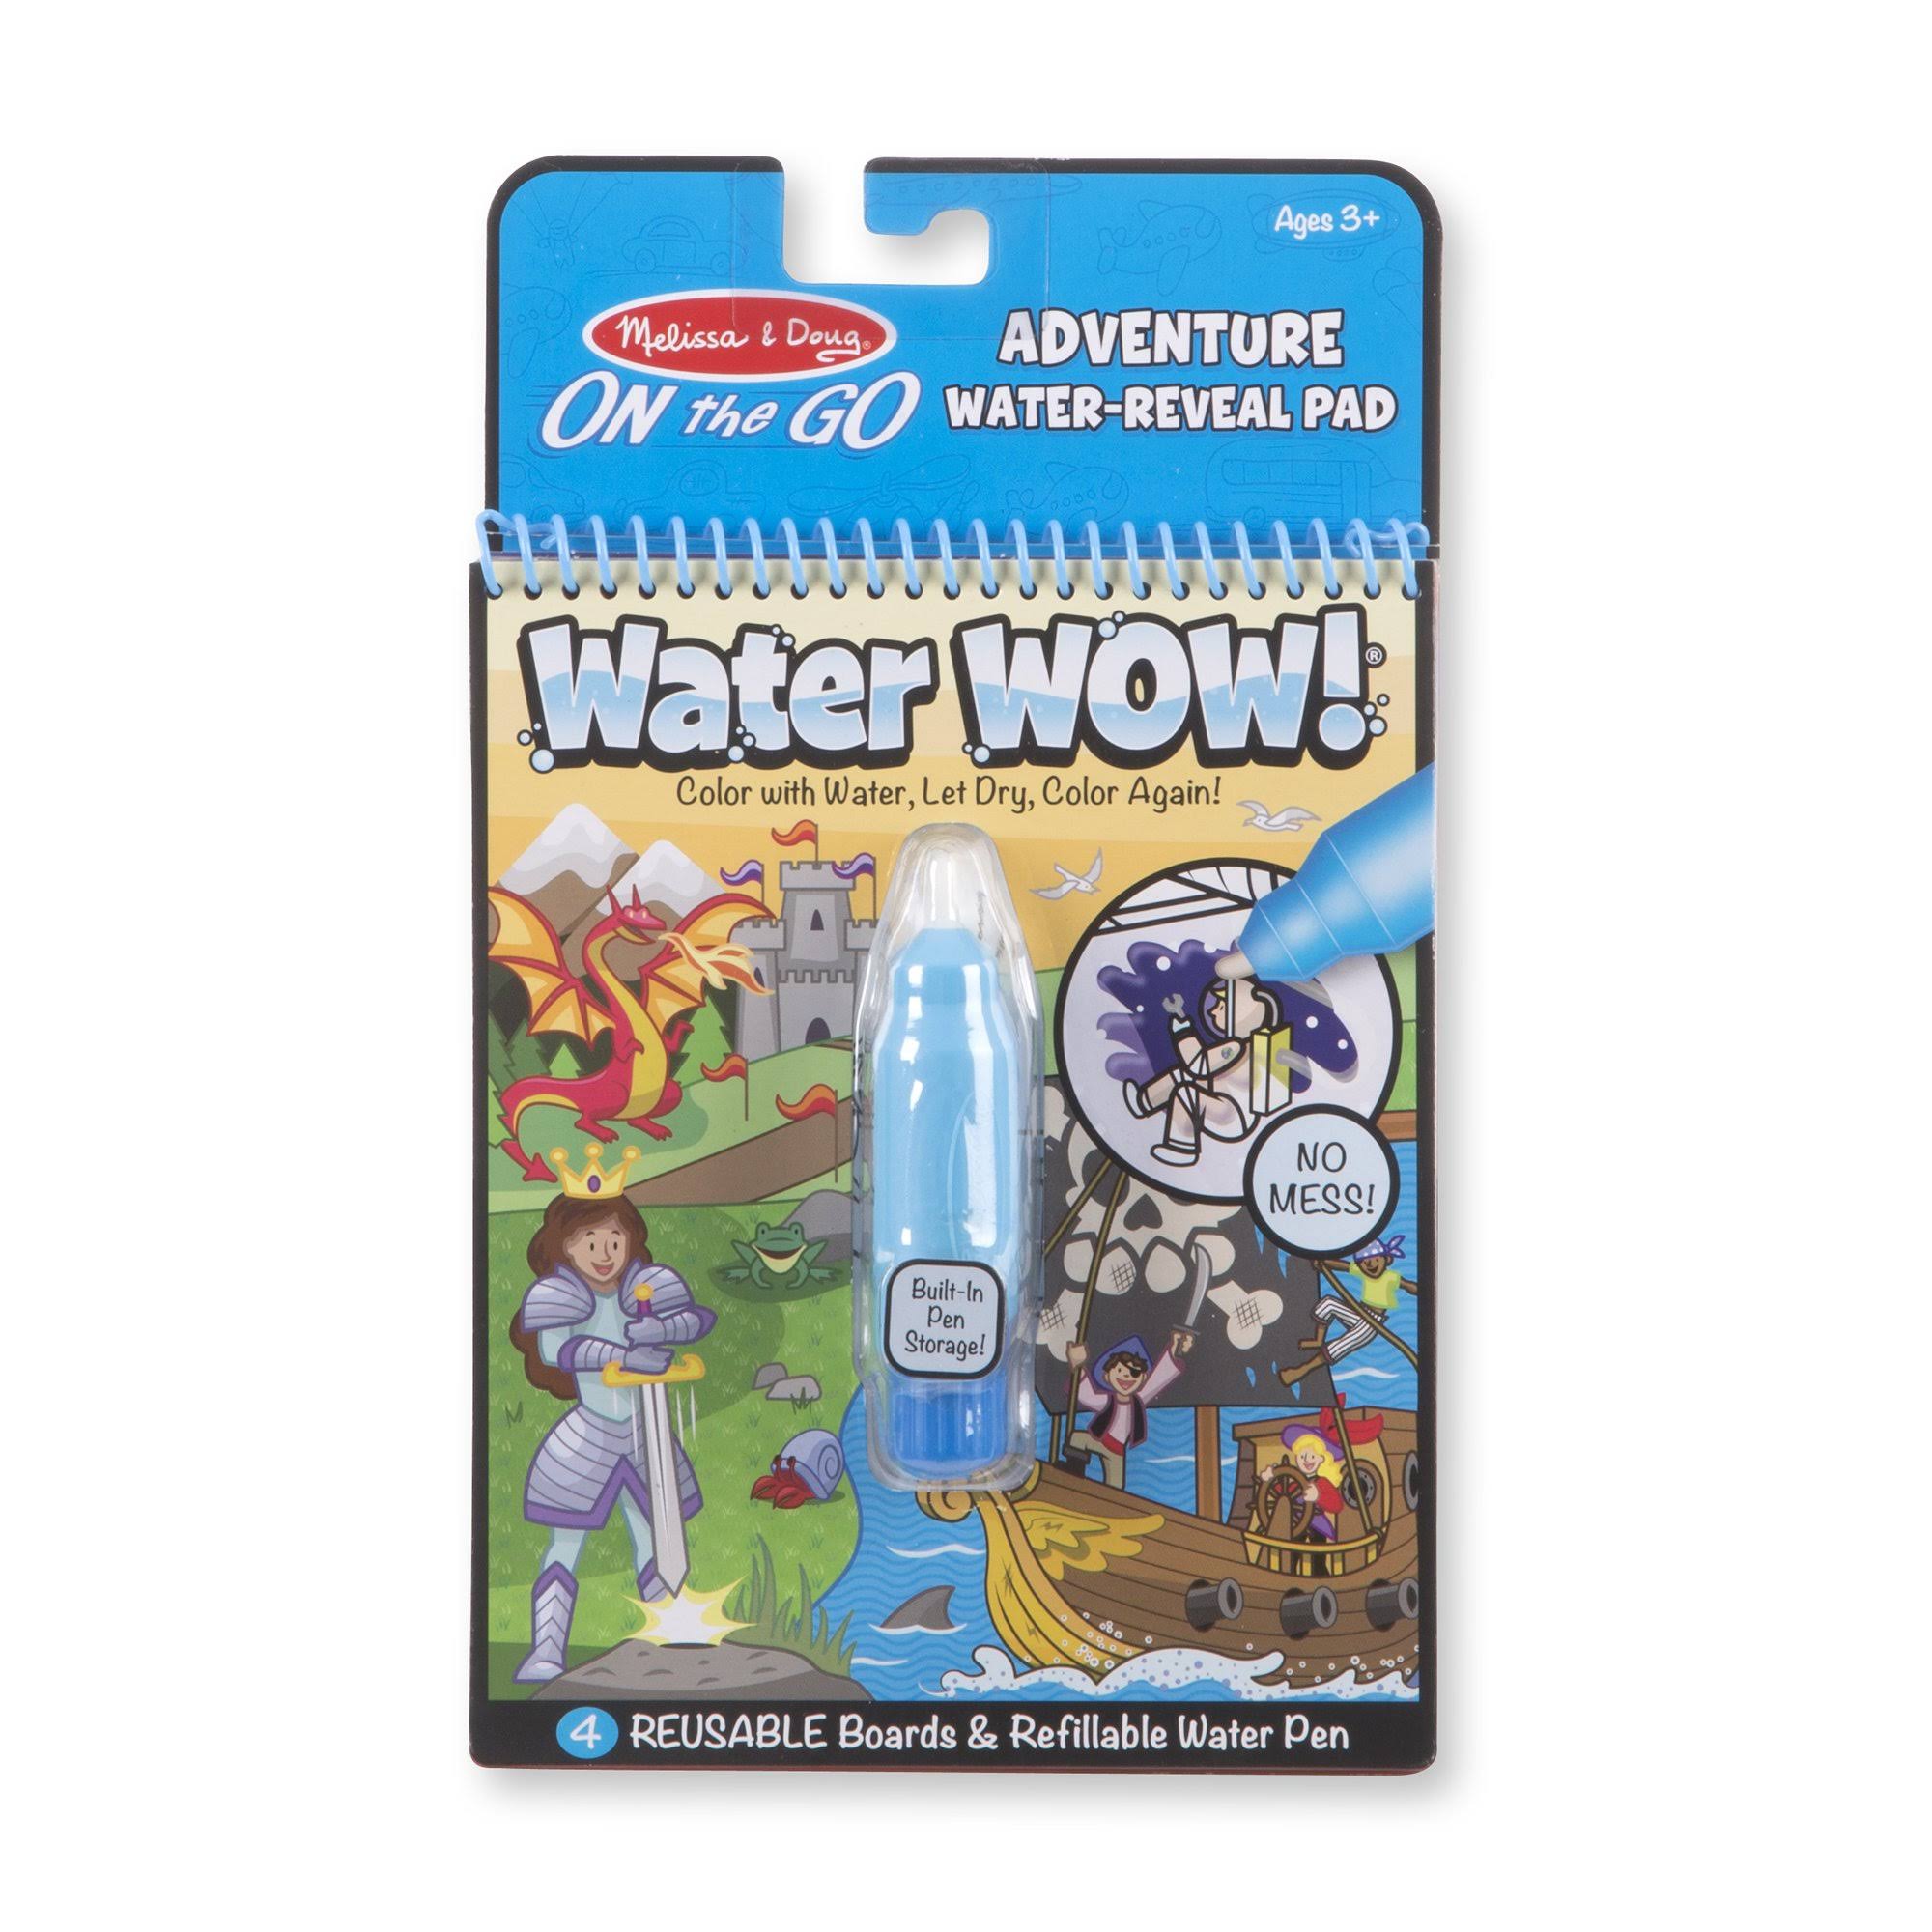 Melissa & Doug on The Go Water Wow! Reusable Water-Reveal Activity Pad - Adventure